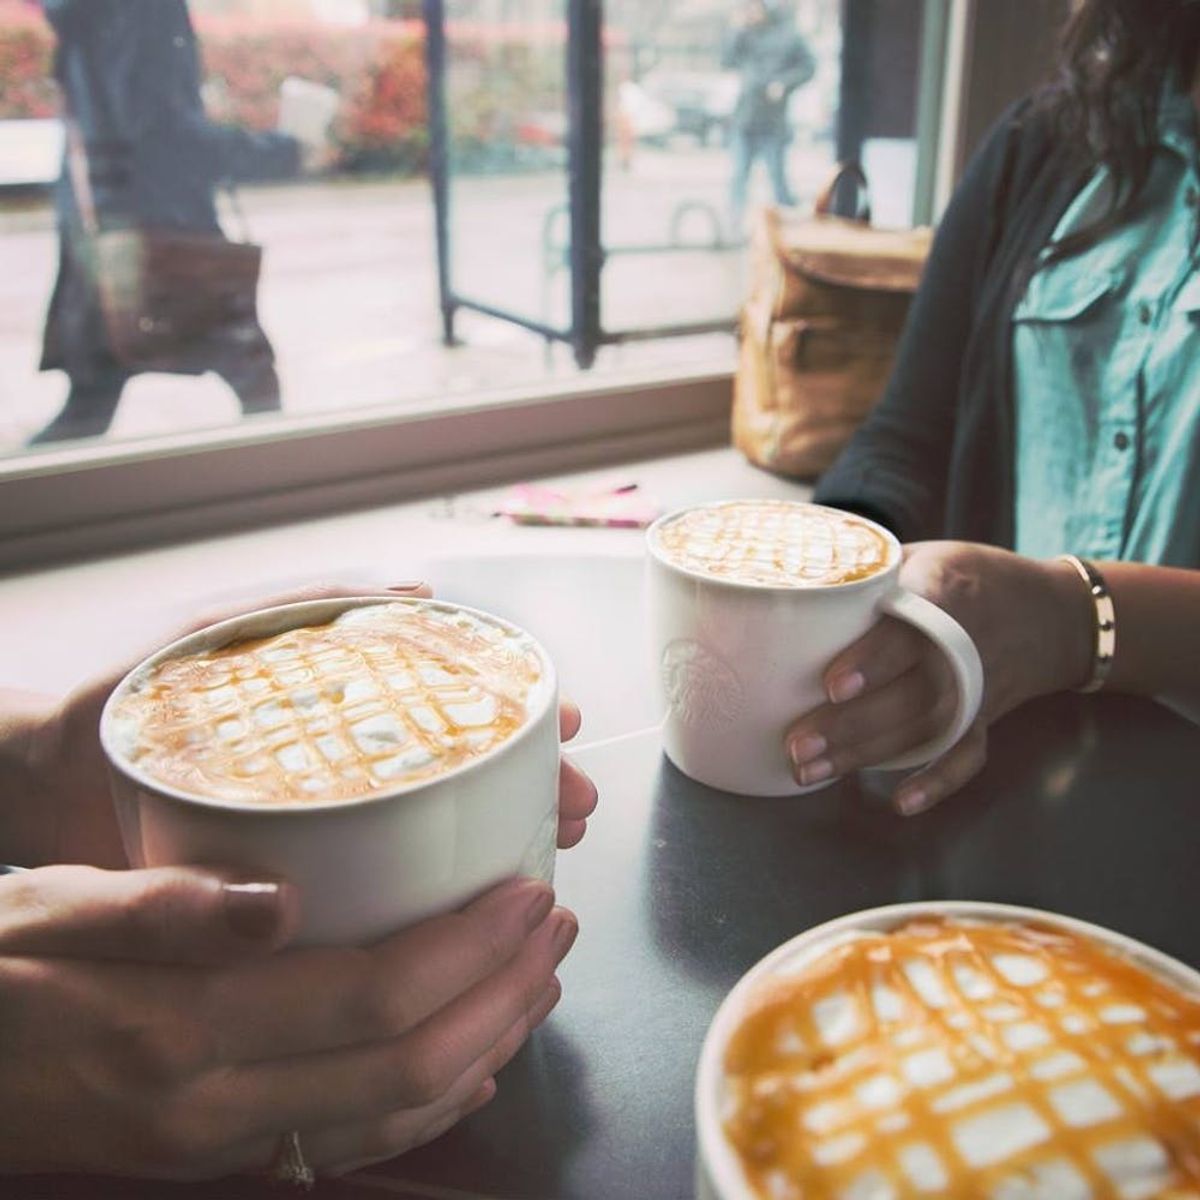 Starbucks Has Launched a Microsoft Outlook Add-in That Makes Coffee Meetings a Breeze